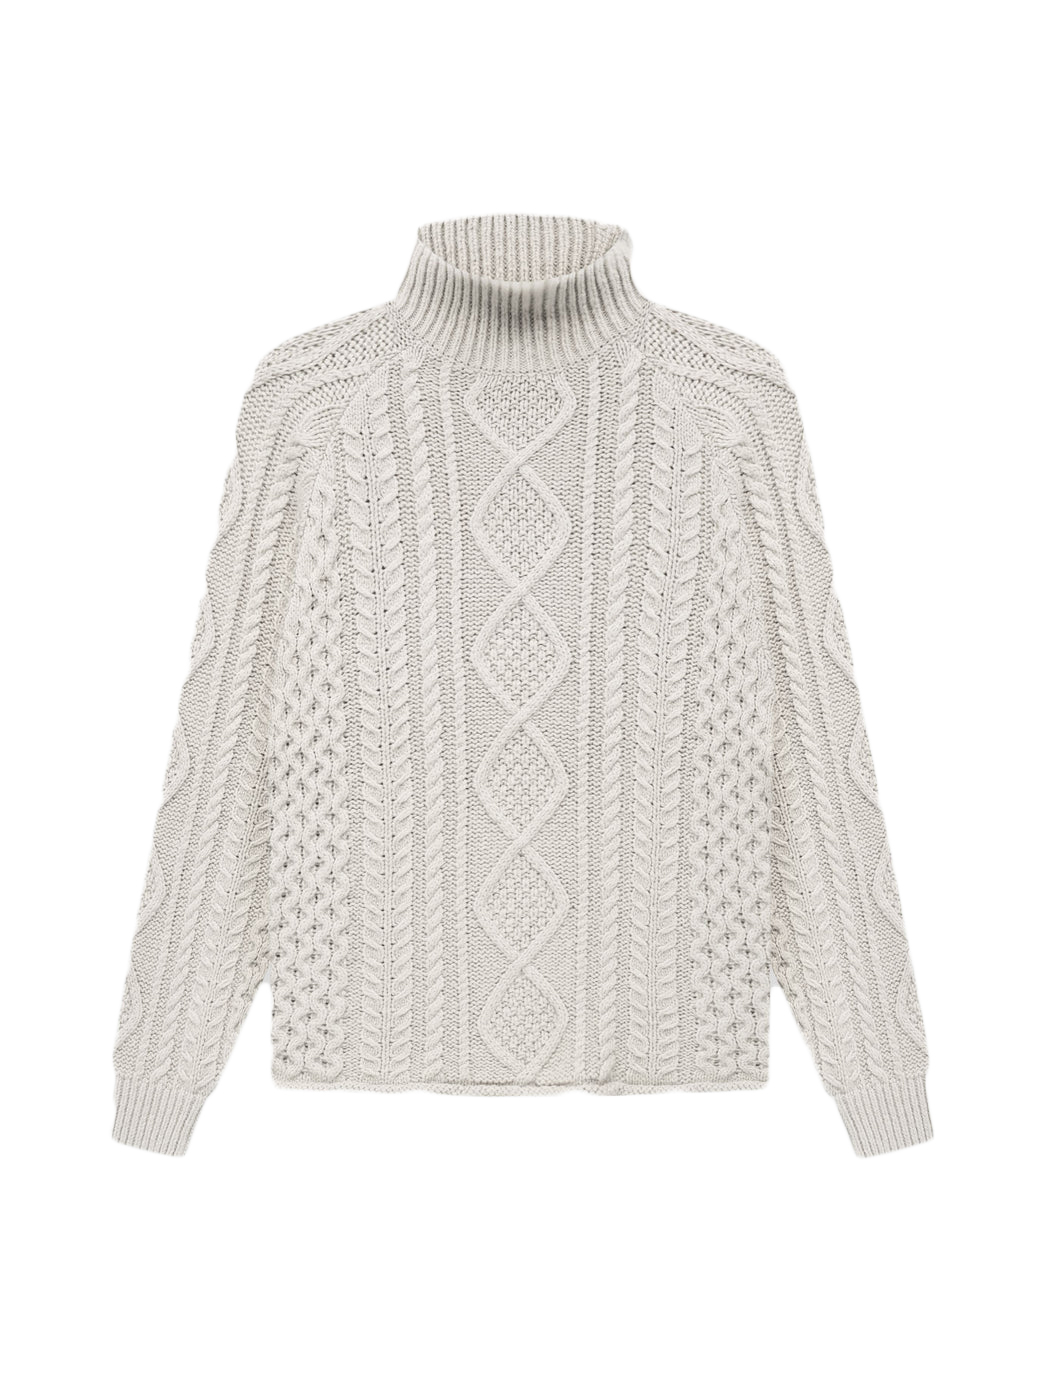 Fear of God Essentials Cable Knit Turtleneck Wheat Men's - SS22 - US